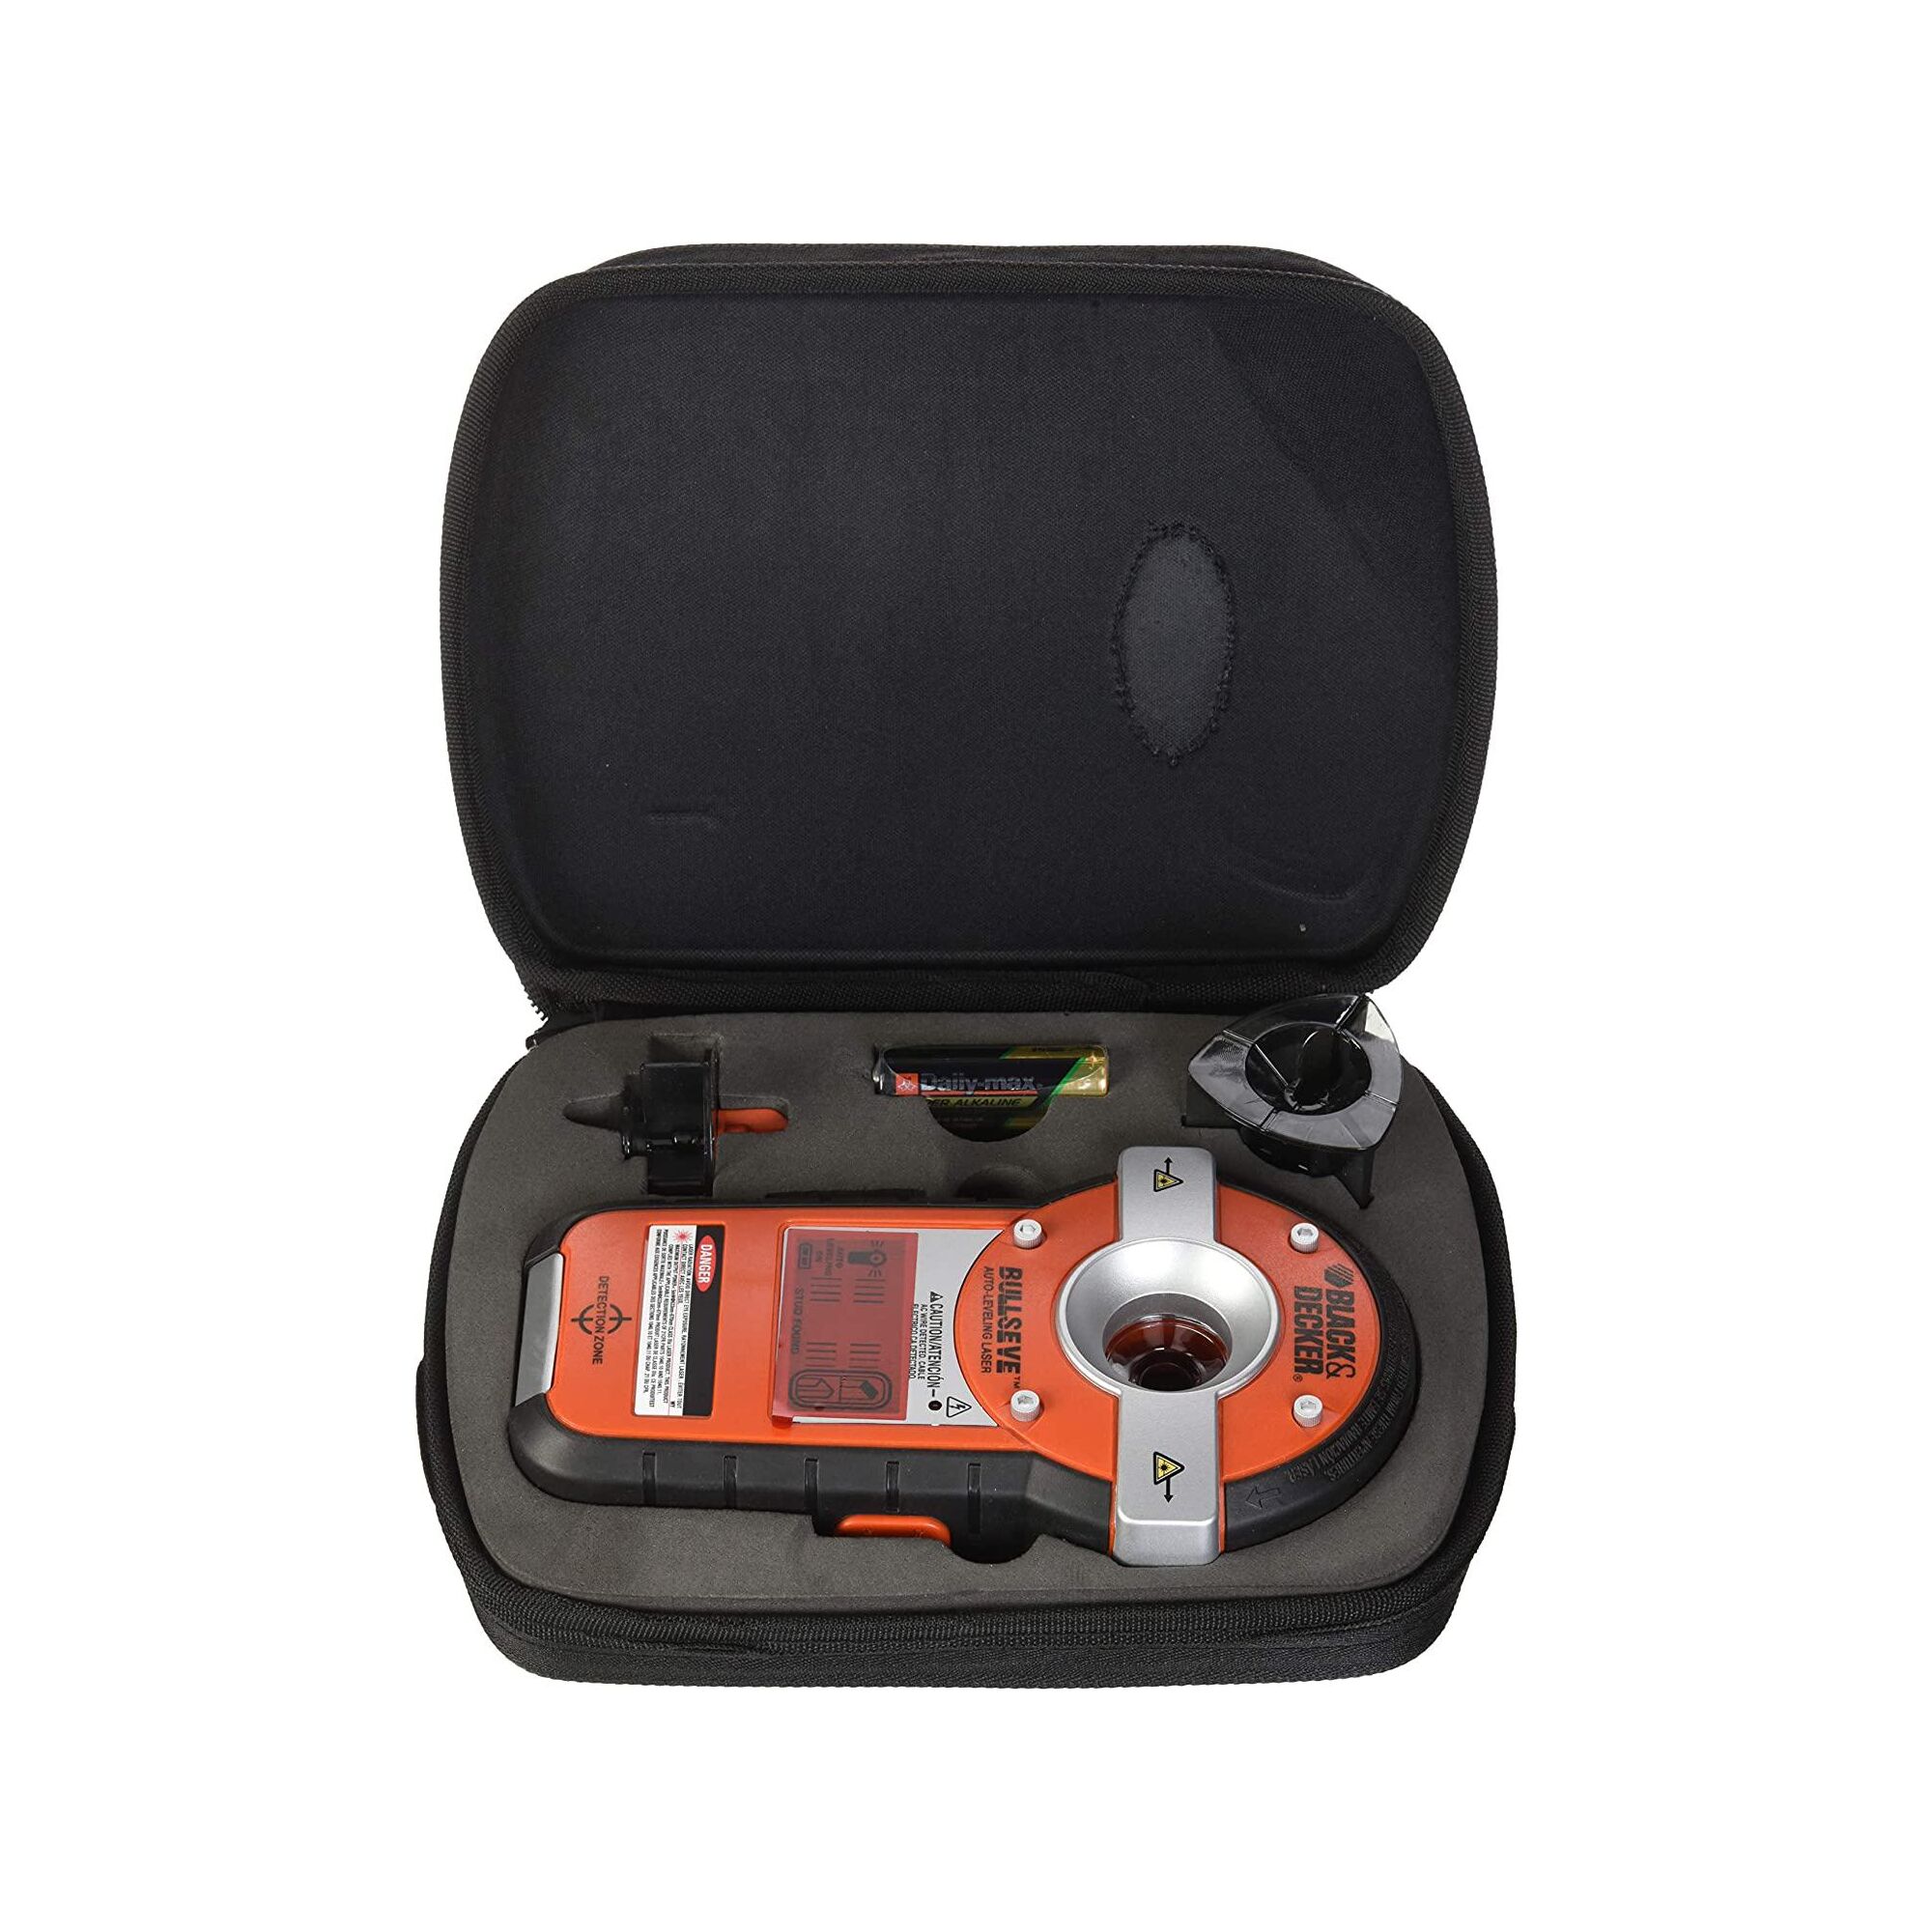 Black and decker Bulls Eye Auto Leveling Laser Interco stored in storage case with lid open